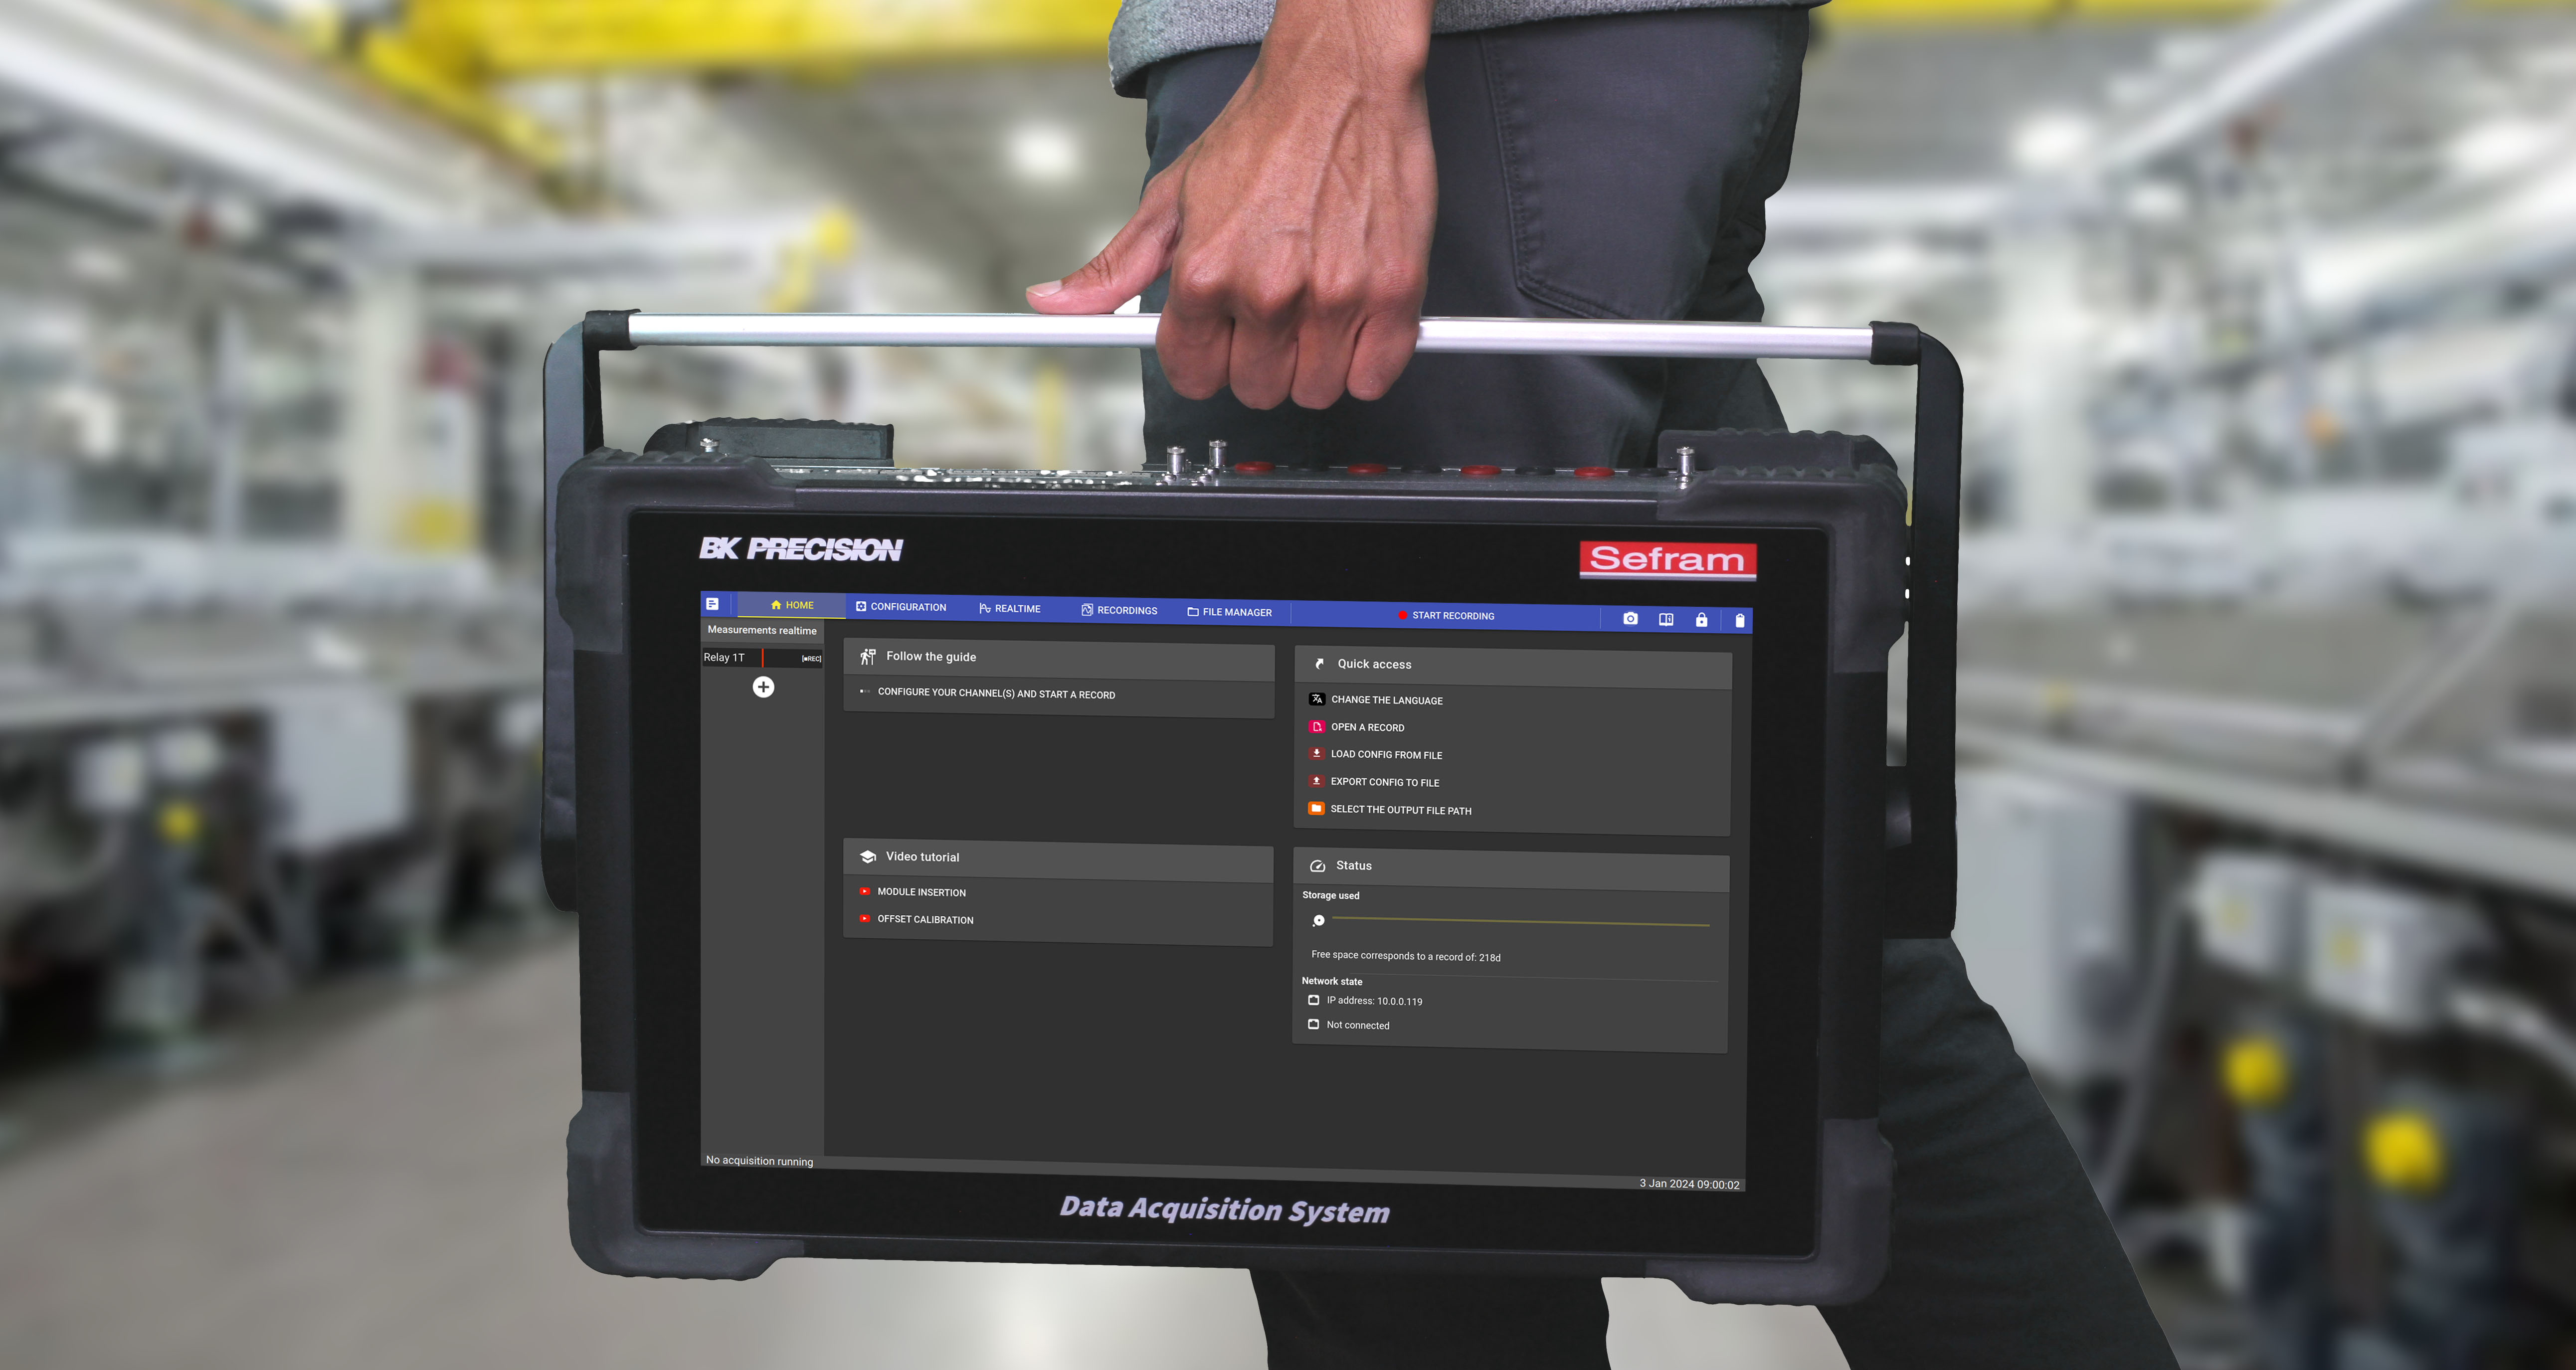 DAS1800 high speed data acquisition system with a 15.6” full HD multi-touch display.